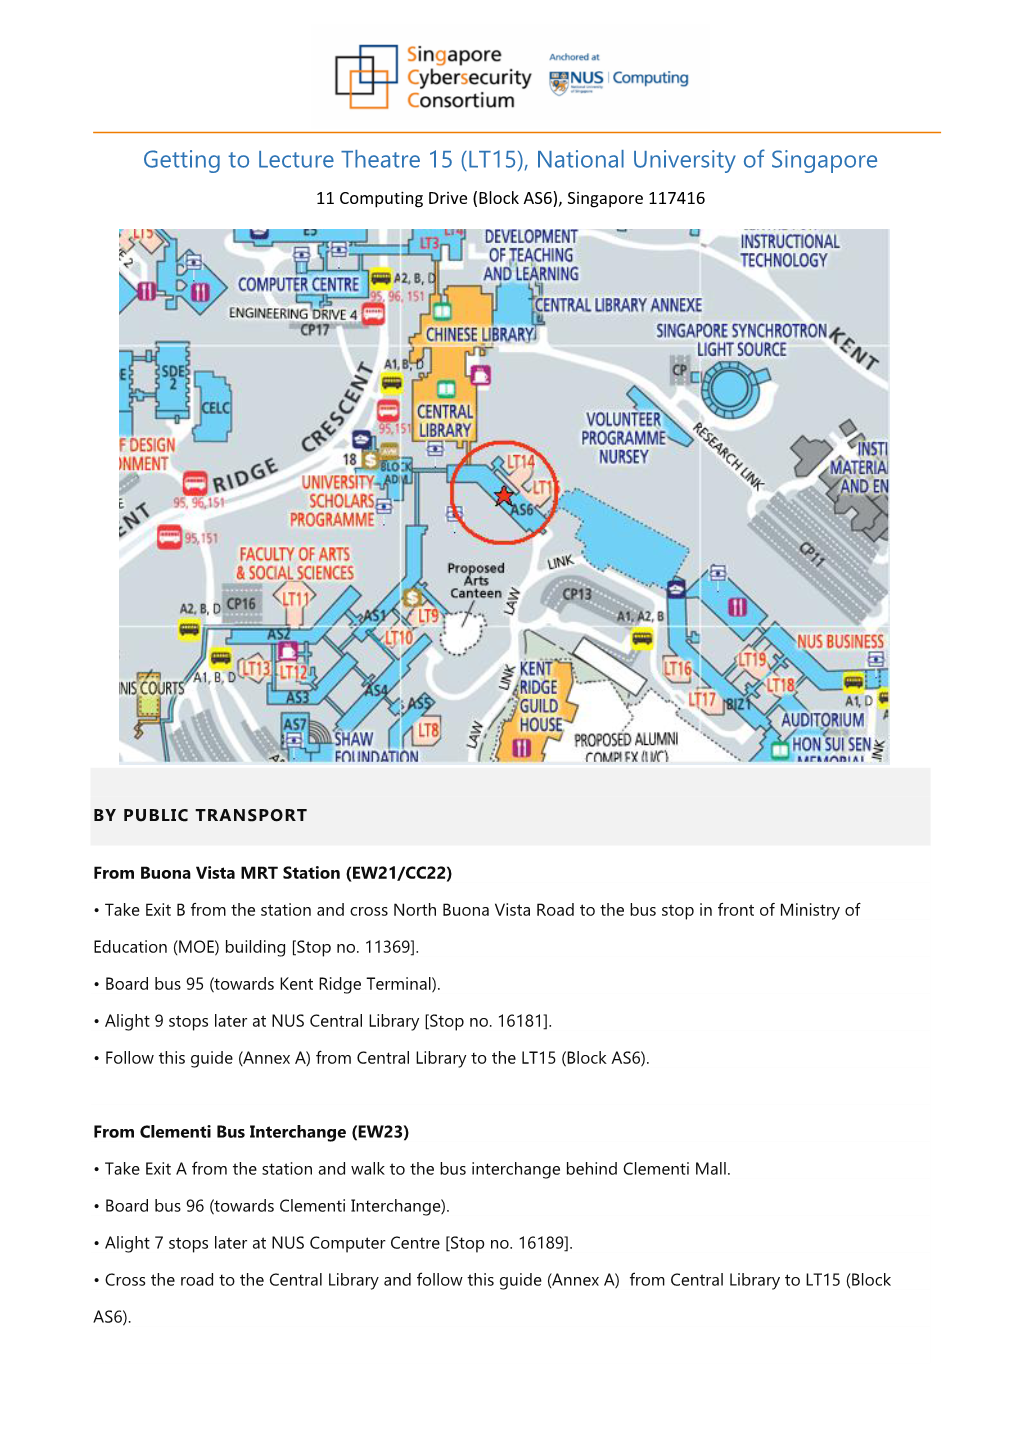 Getting to Lecture Theatre 15 (LT15), National University of Singapore 11 Computing Drive (Block AS6), Singapore 117416